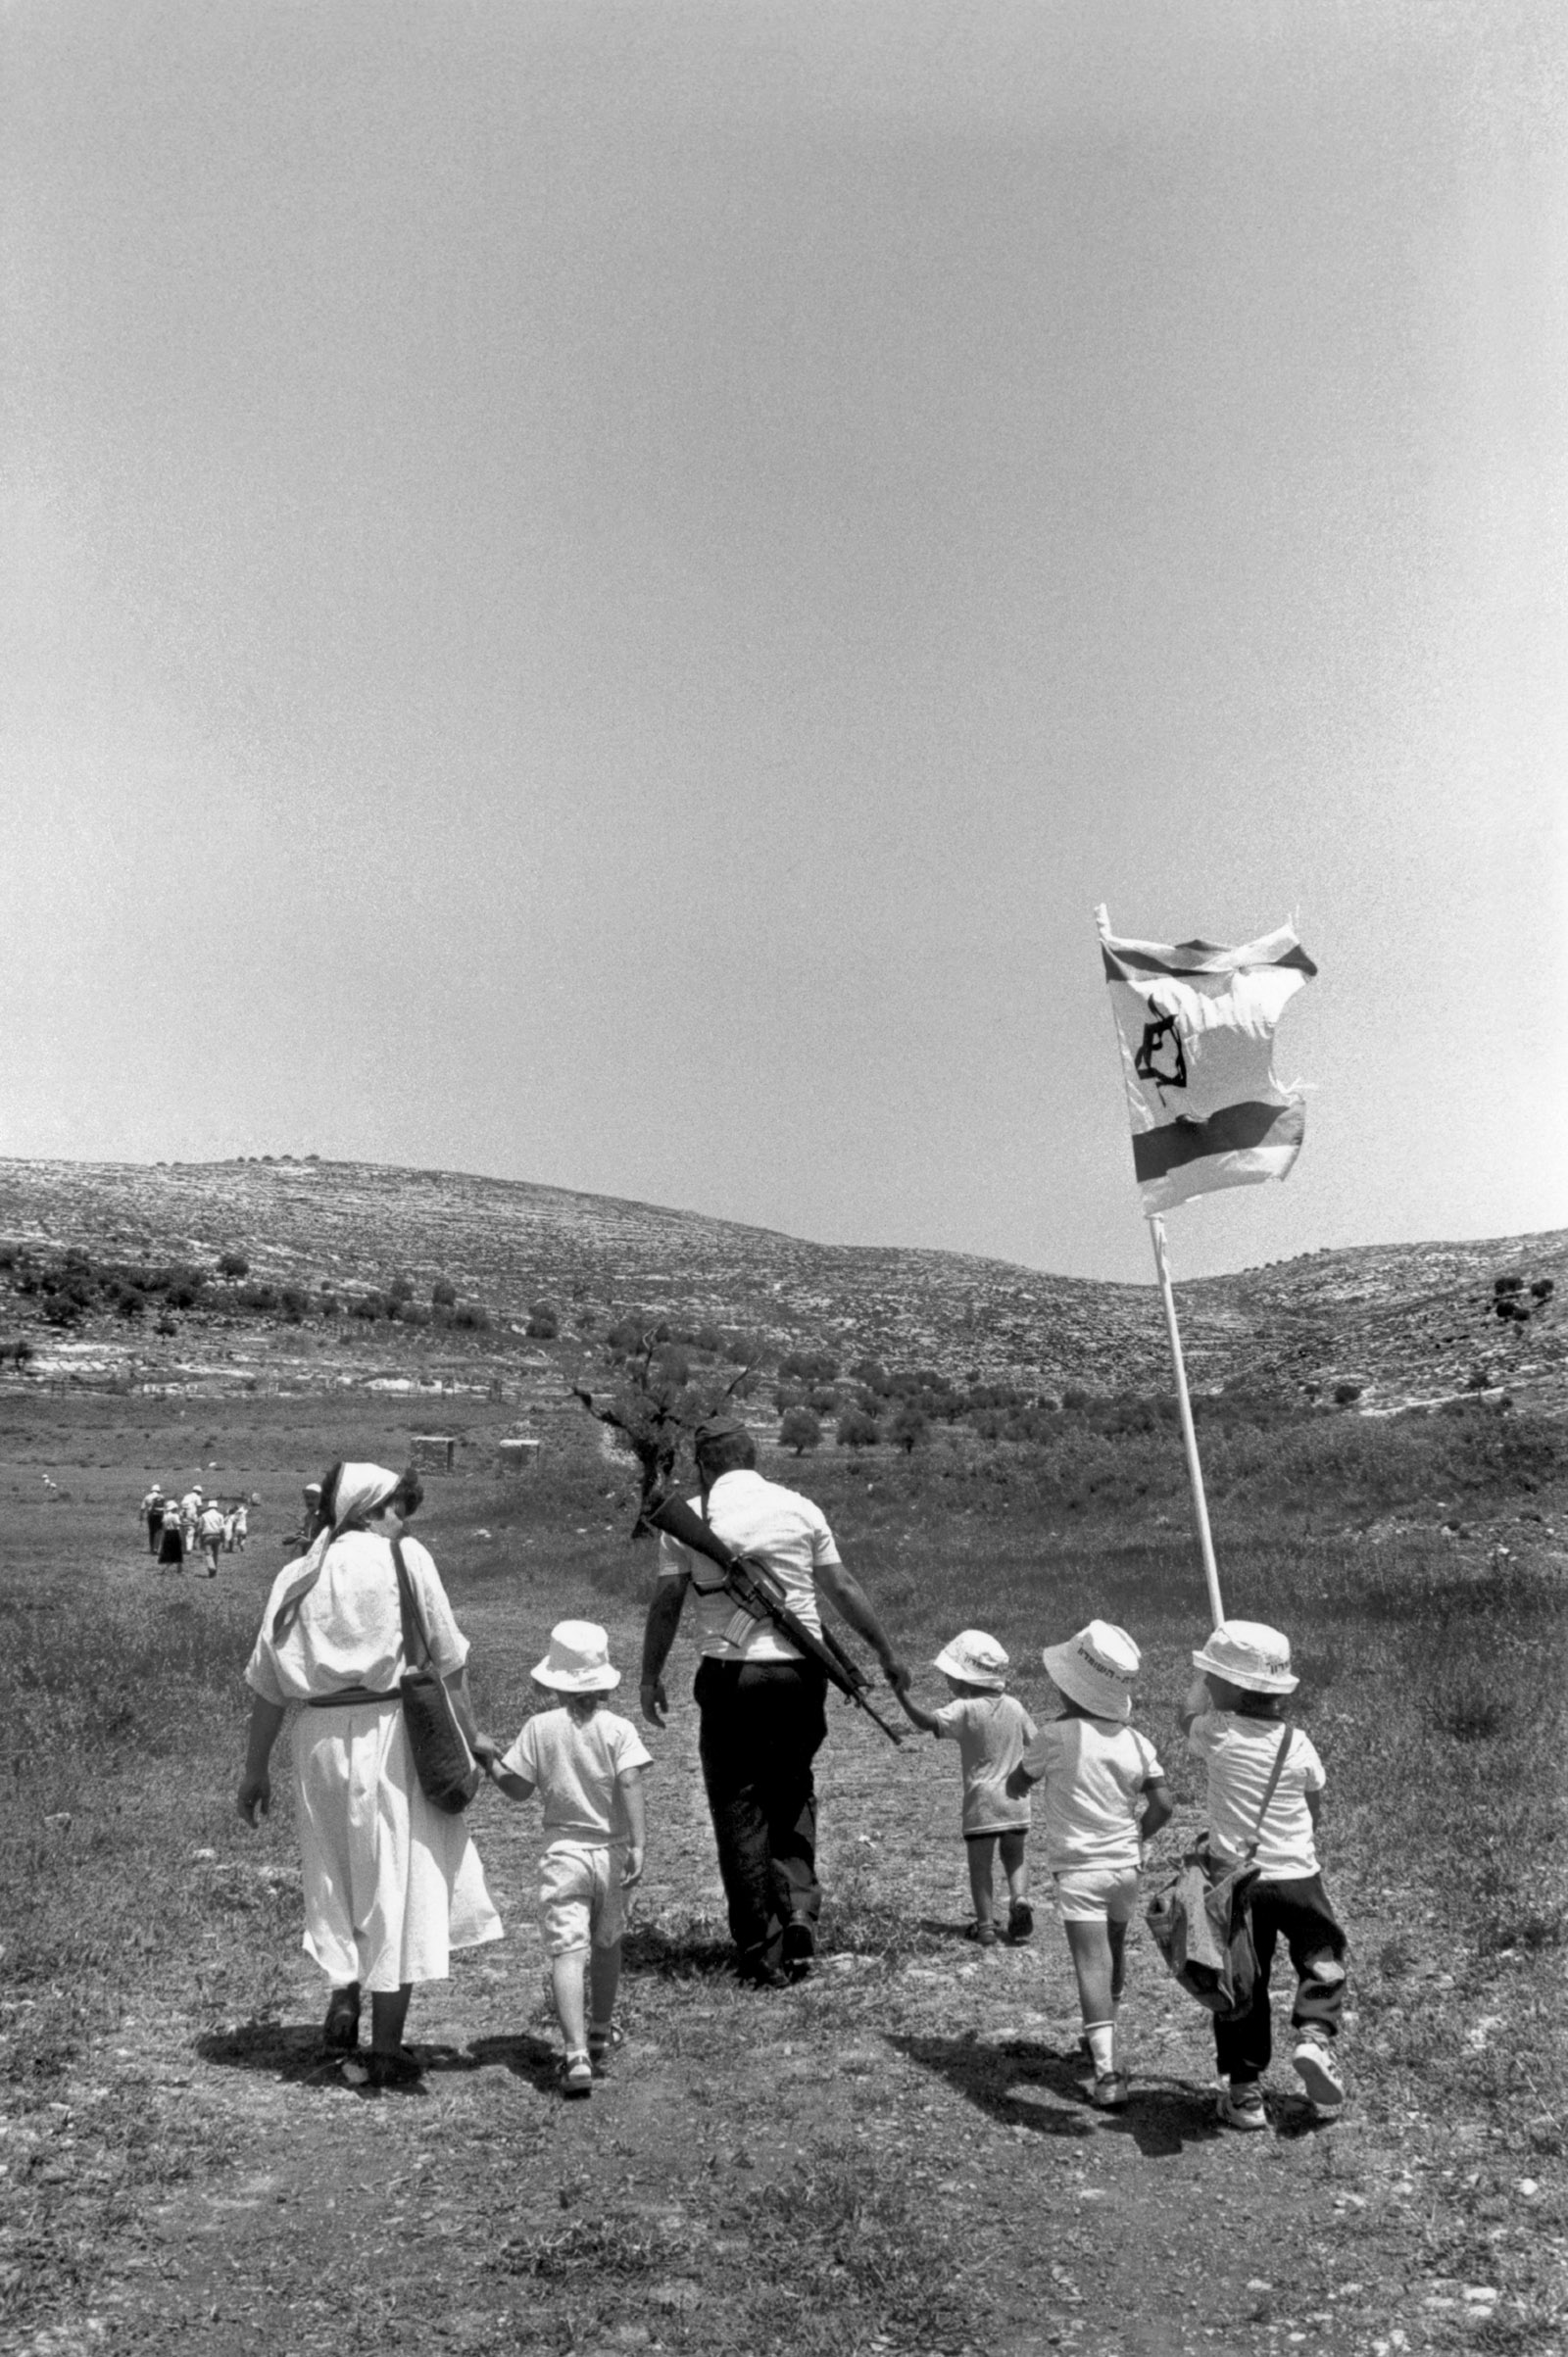 A Jewish family in the occupied West Bank, 1988